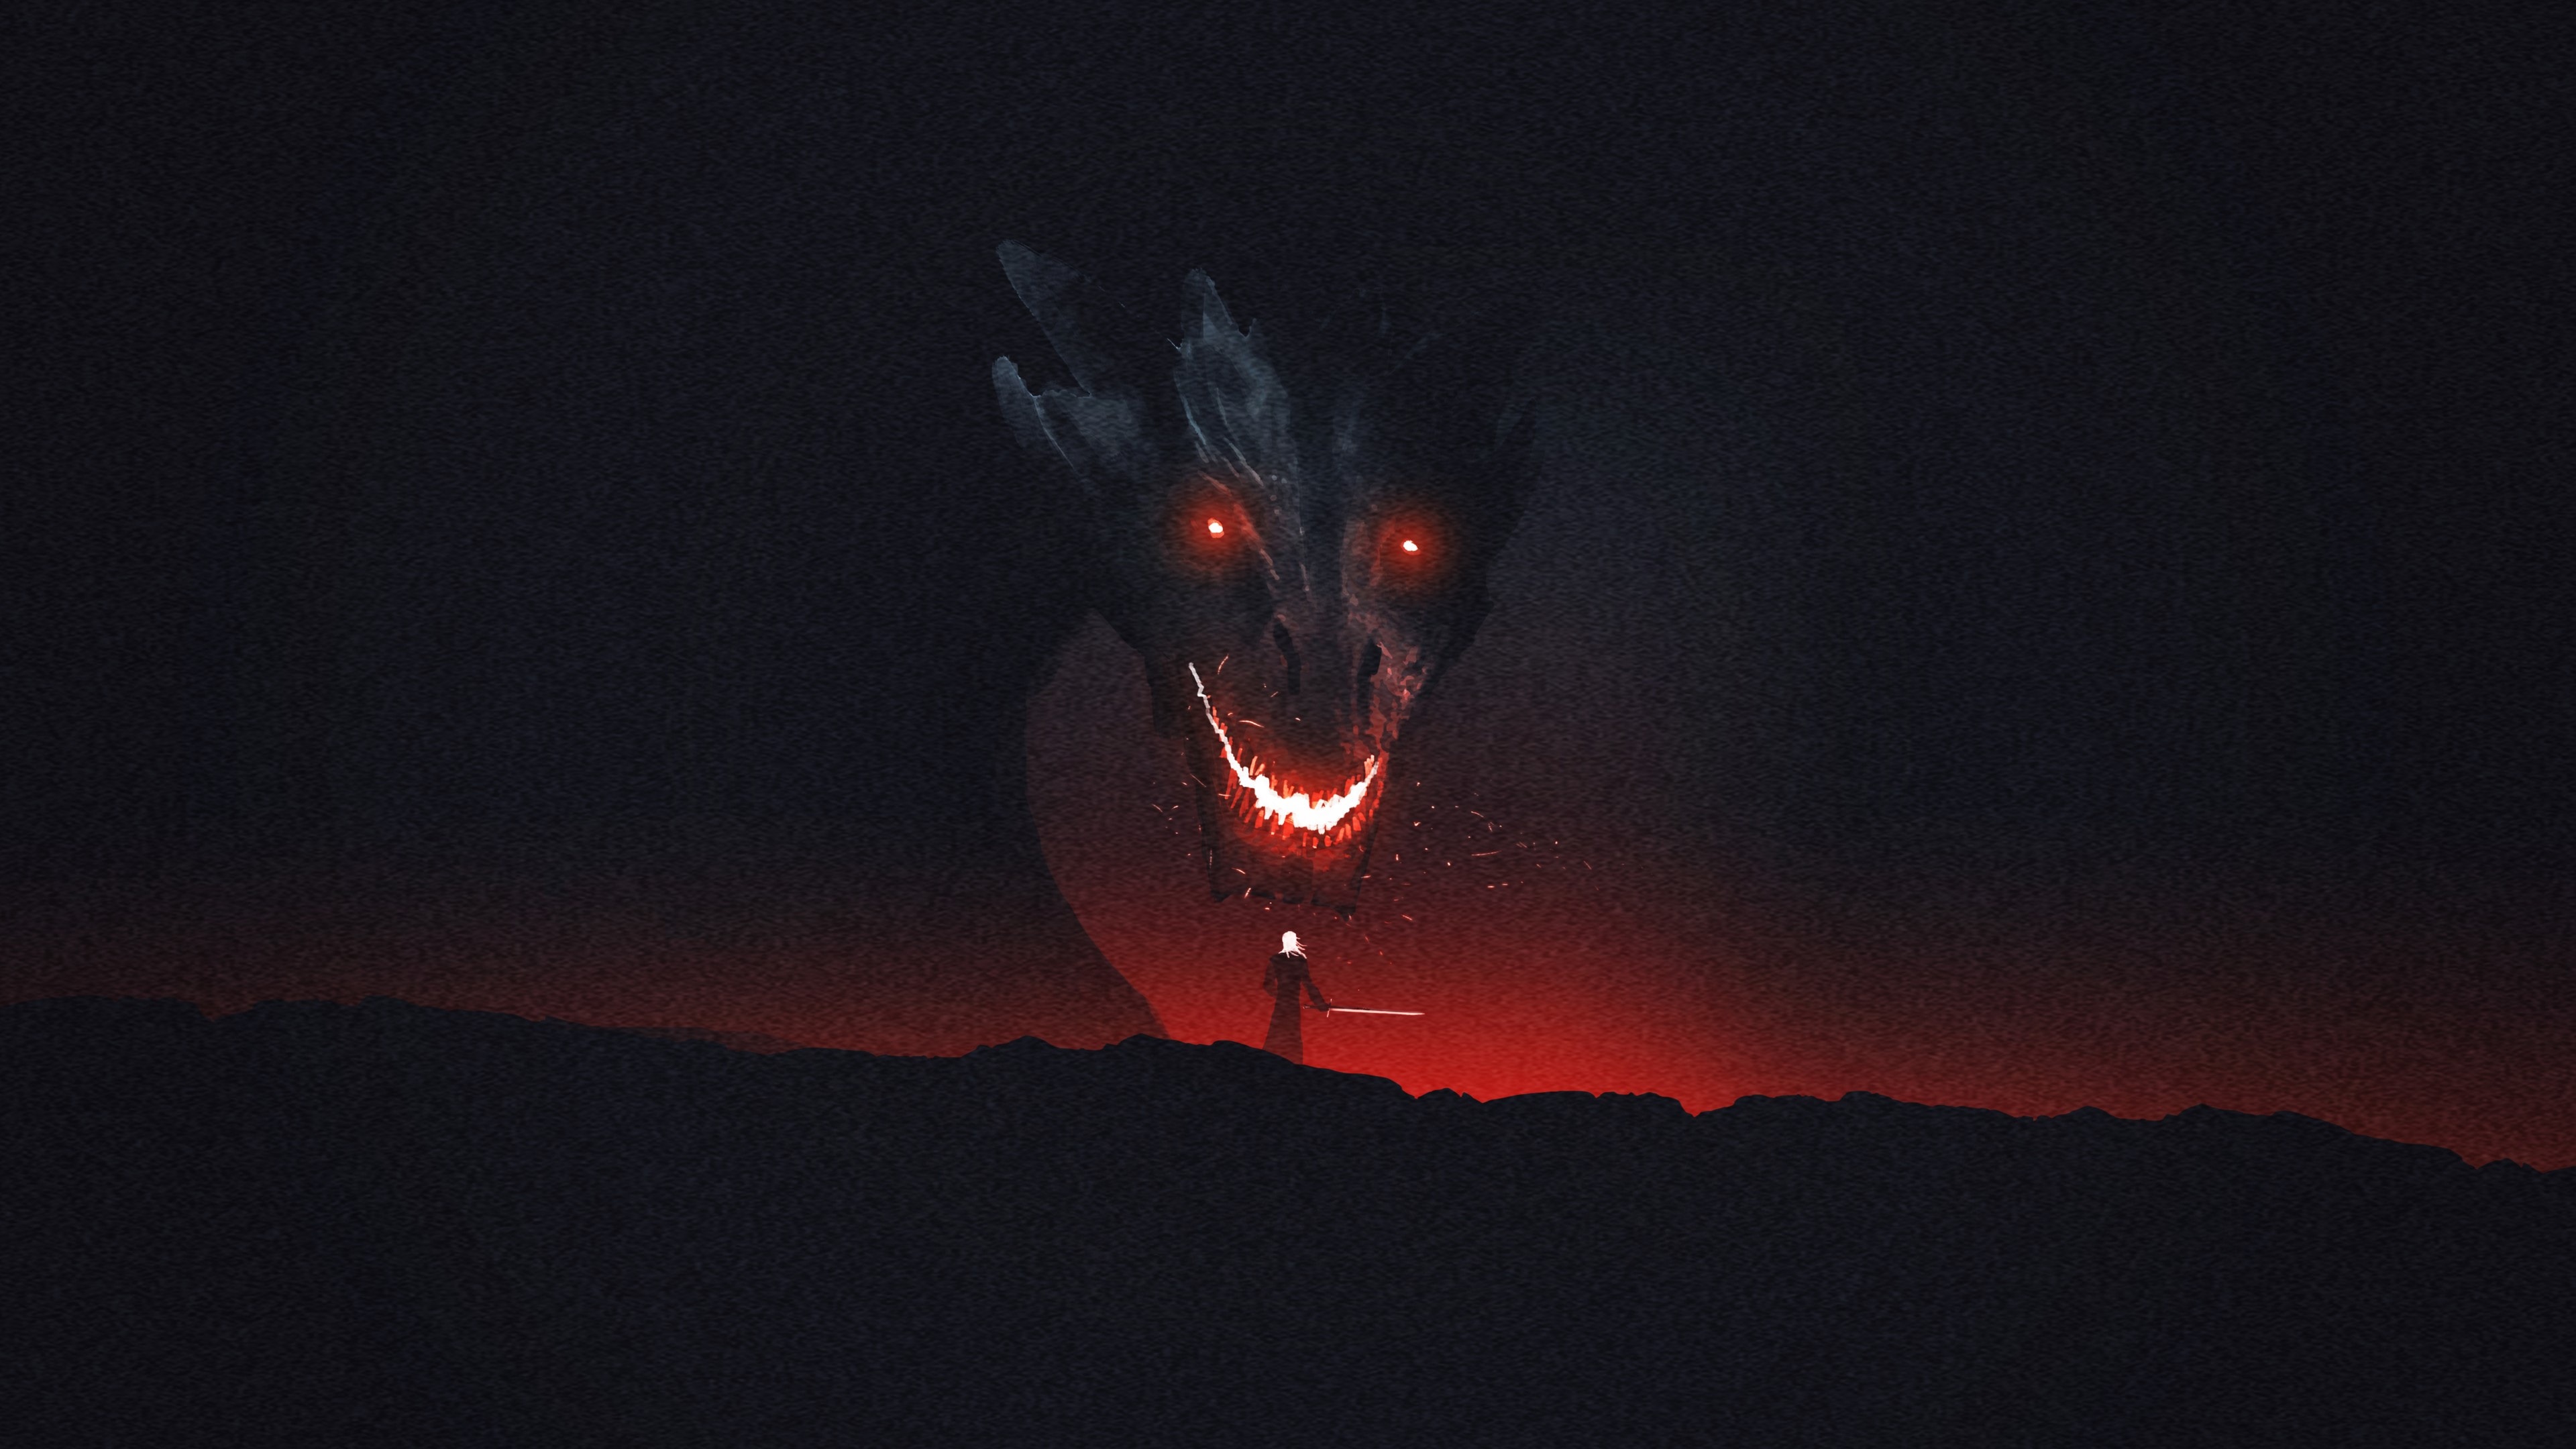 Wallpaper Black and Red Dragon on Fire During Night Time, Background Free Image